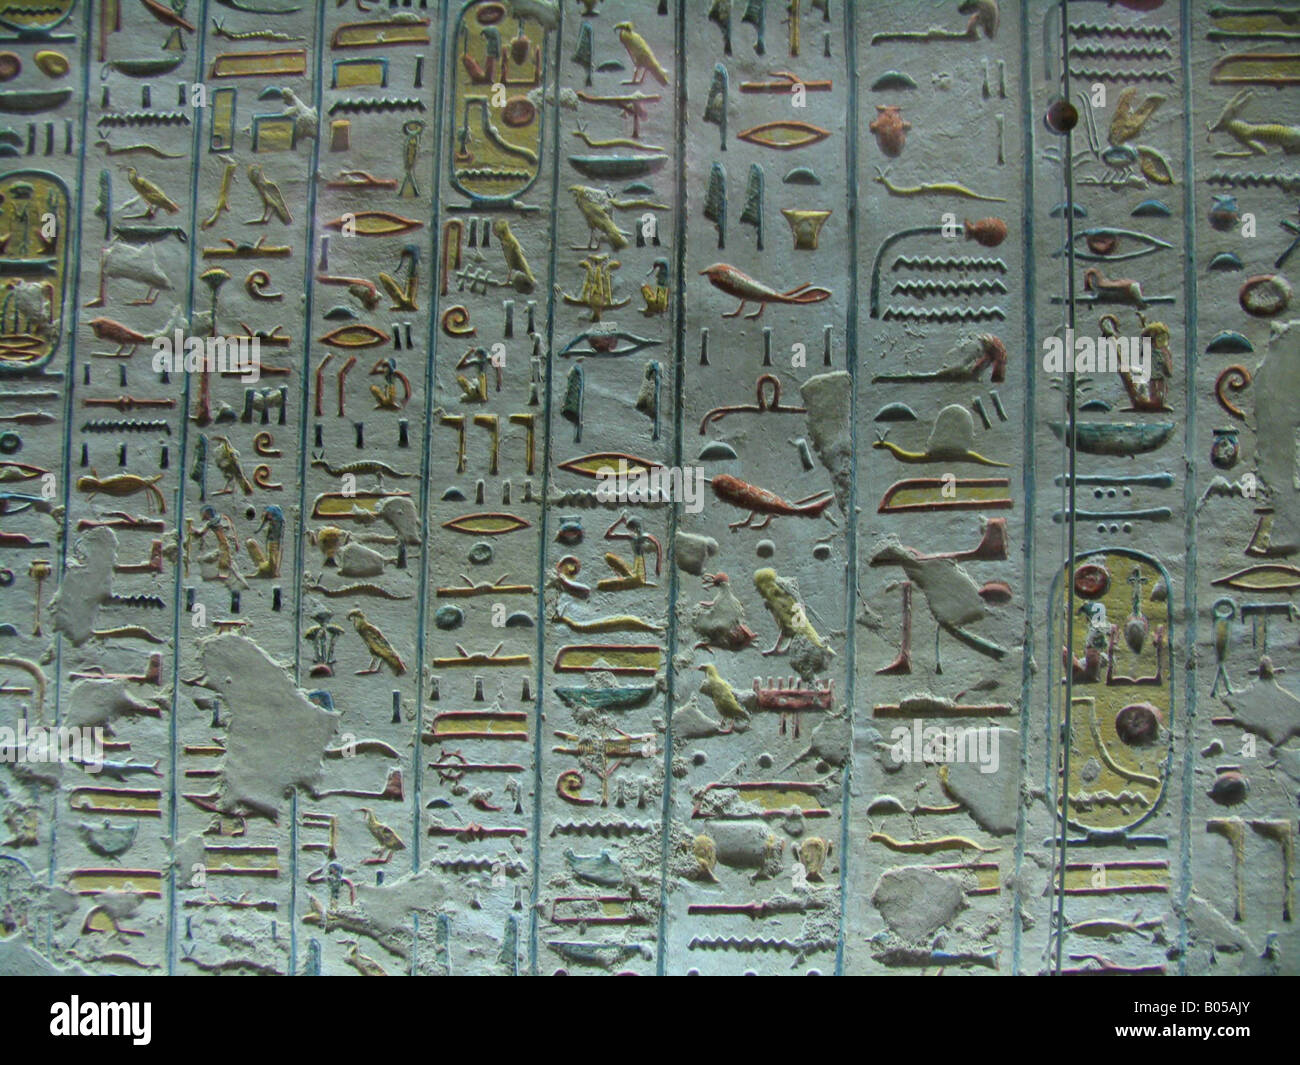 Egyptian hieroglyphs in the Valley of the Kings, Egypt, Luxor Stock Photo